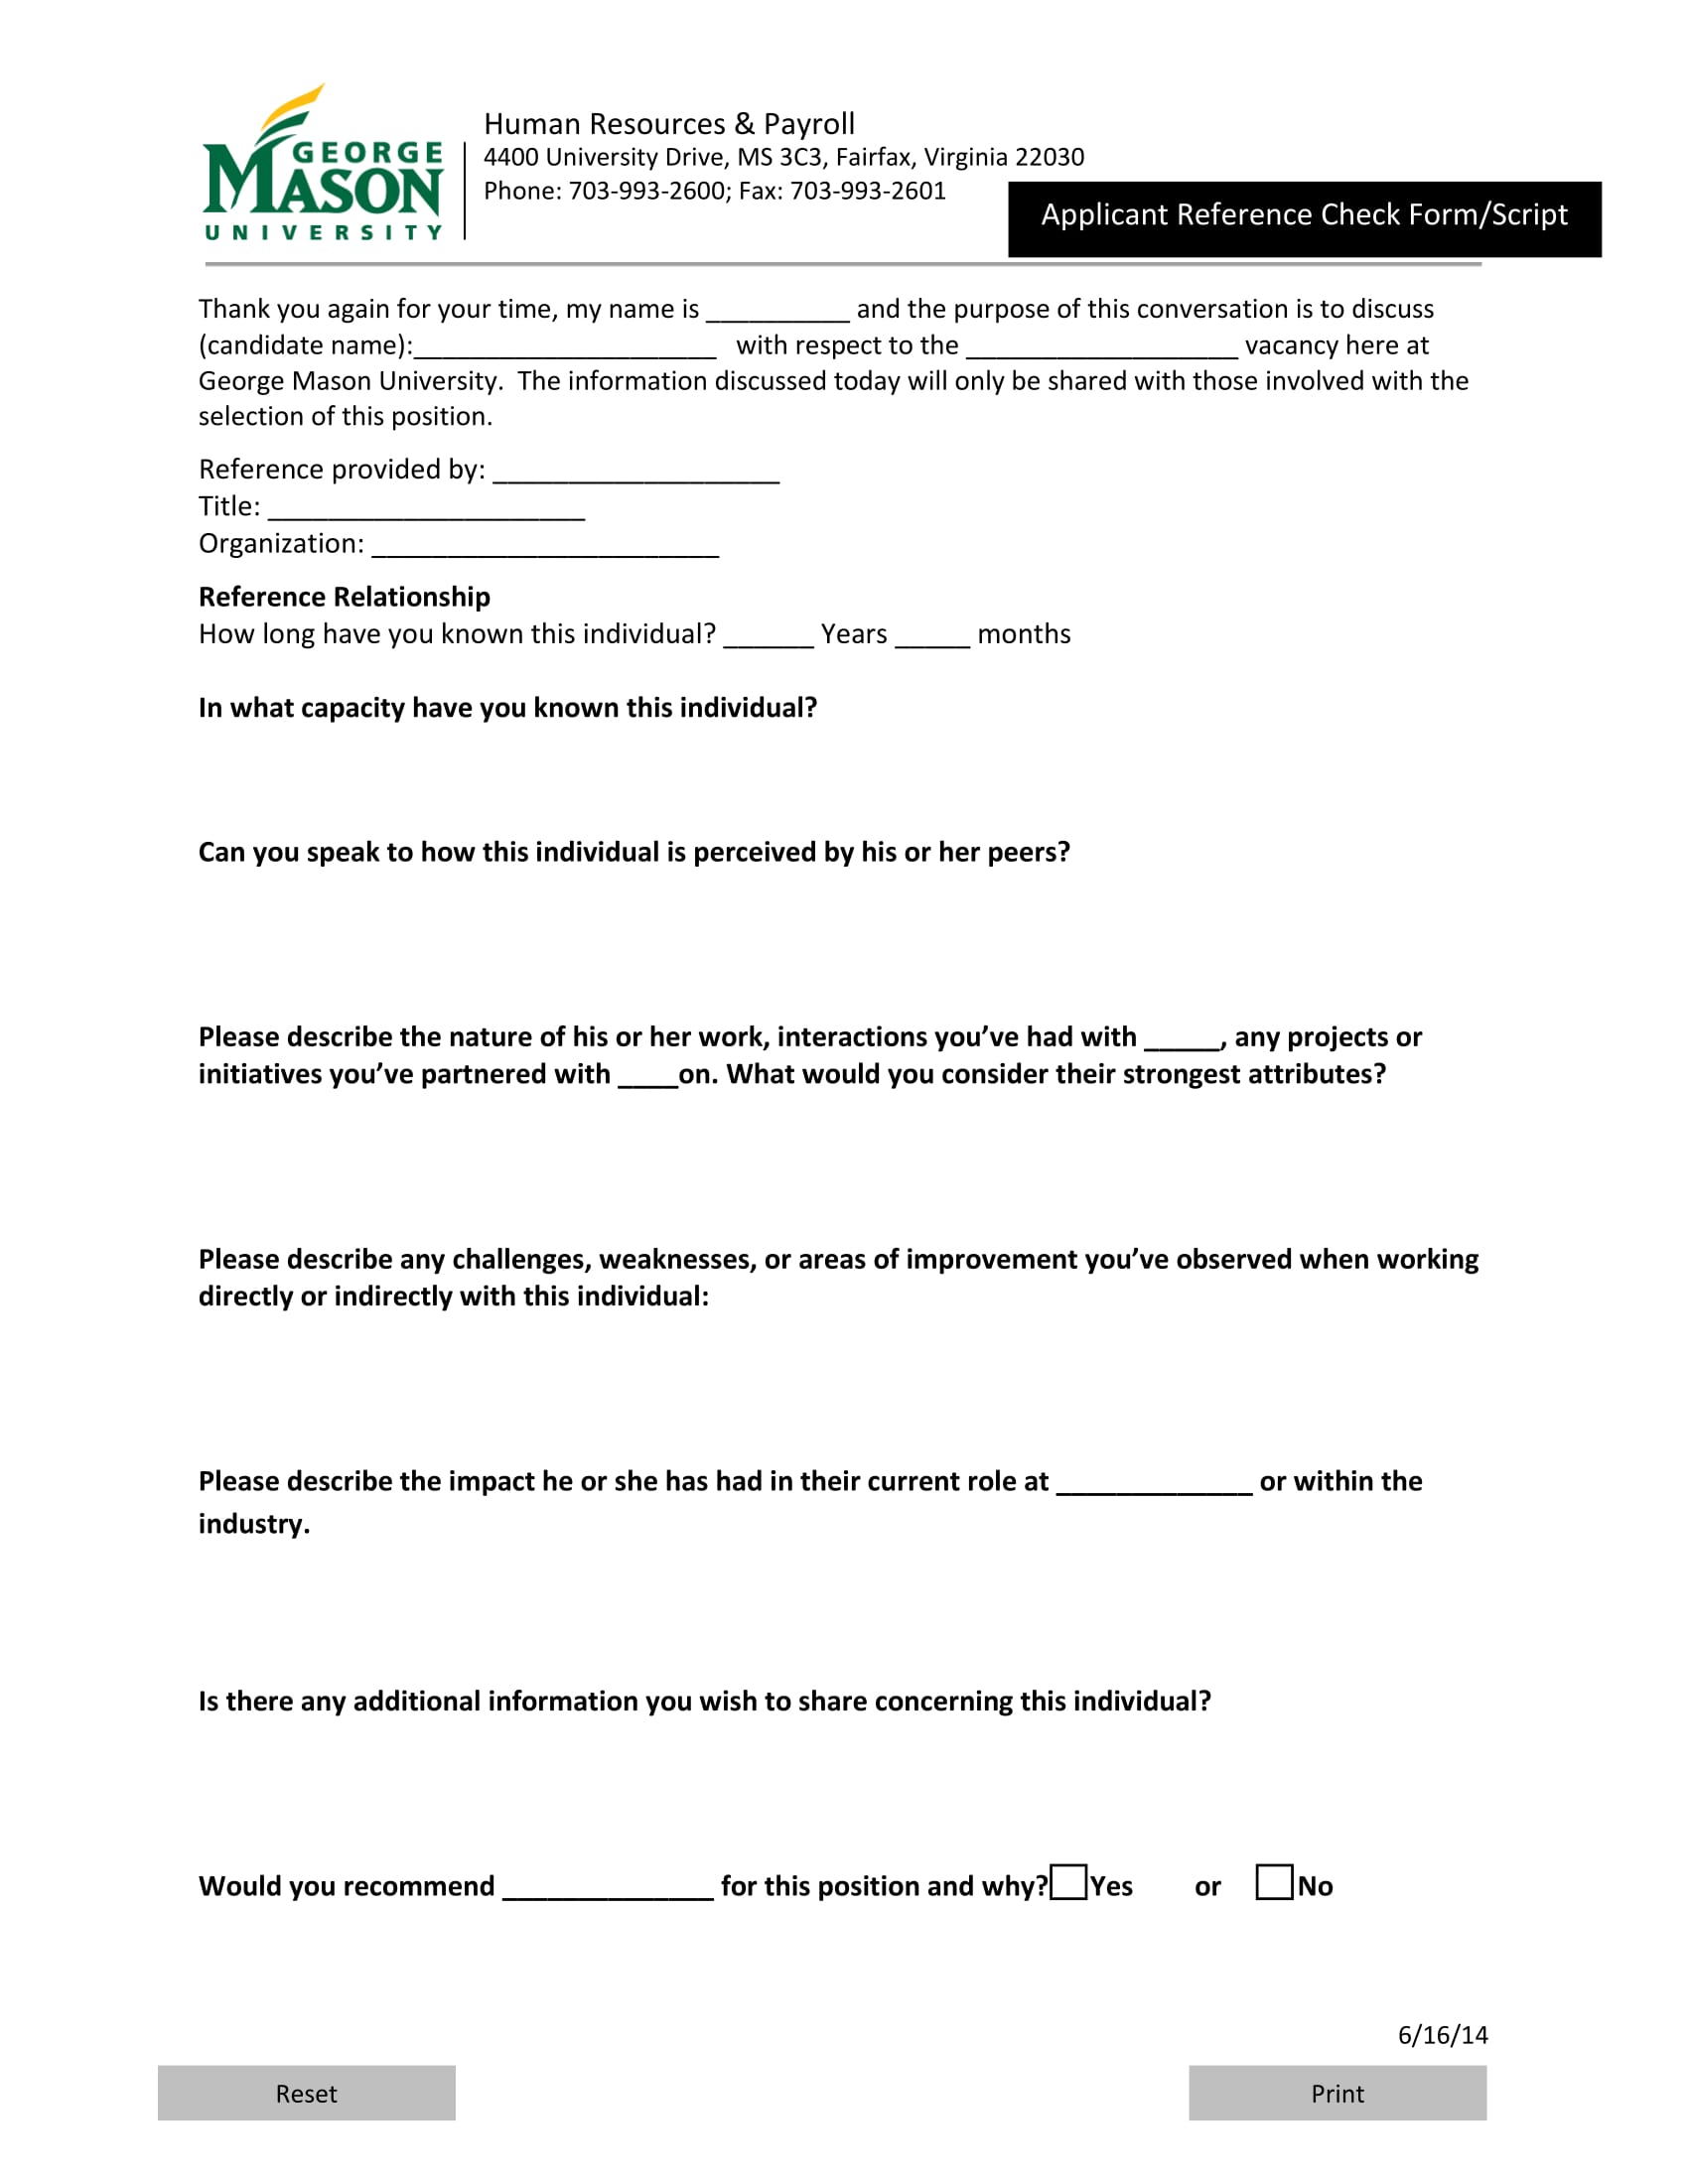 university applicant reference check script form 1